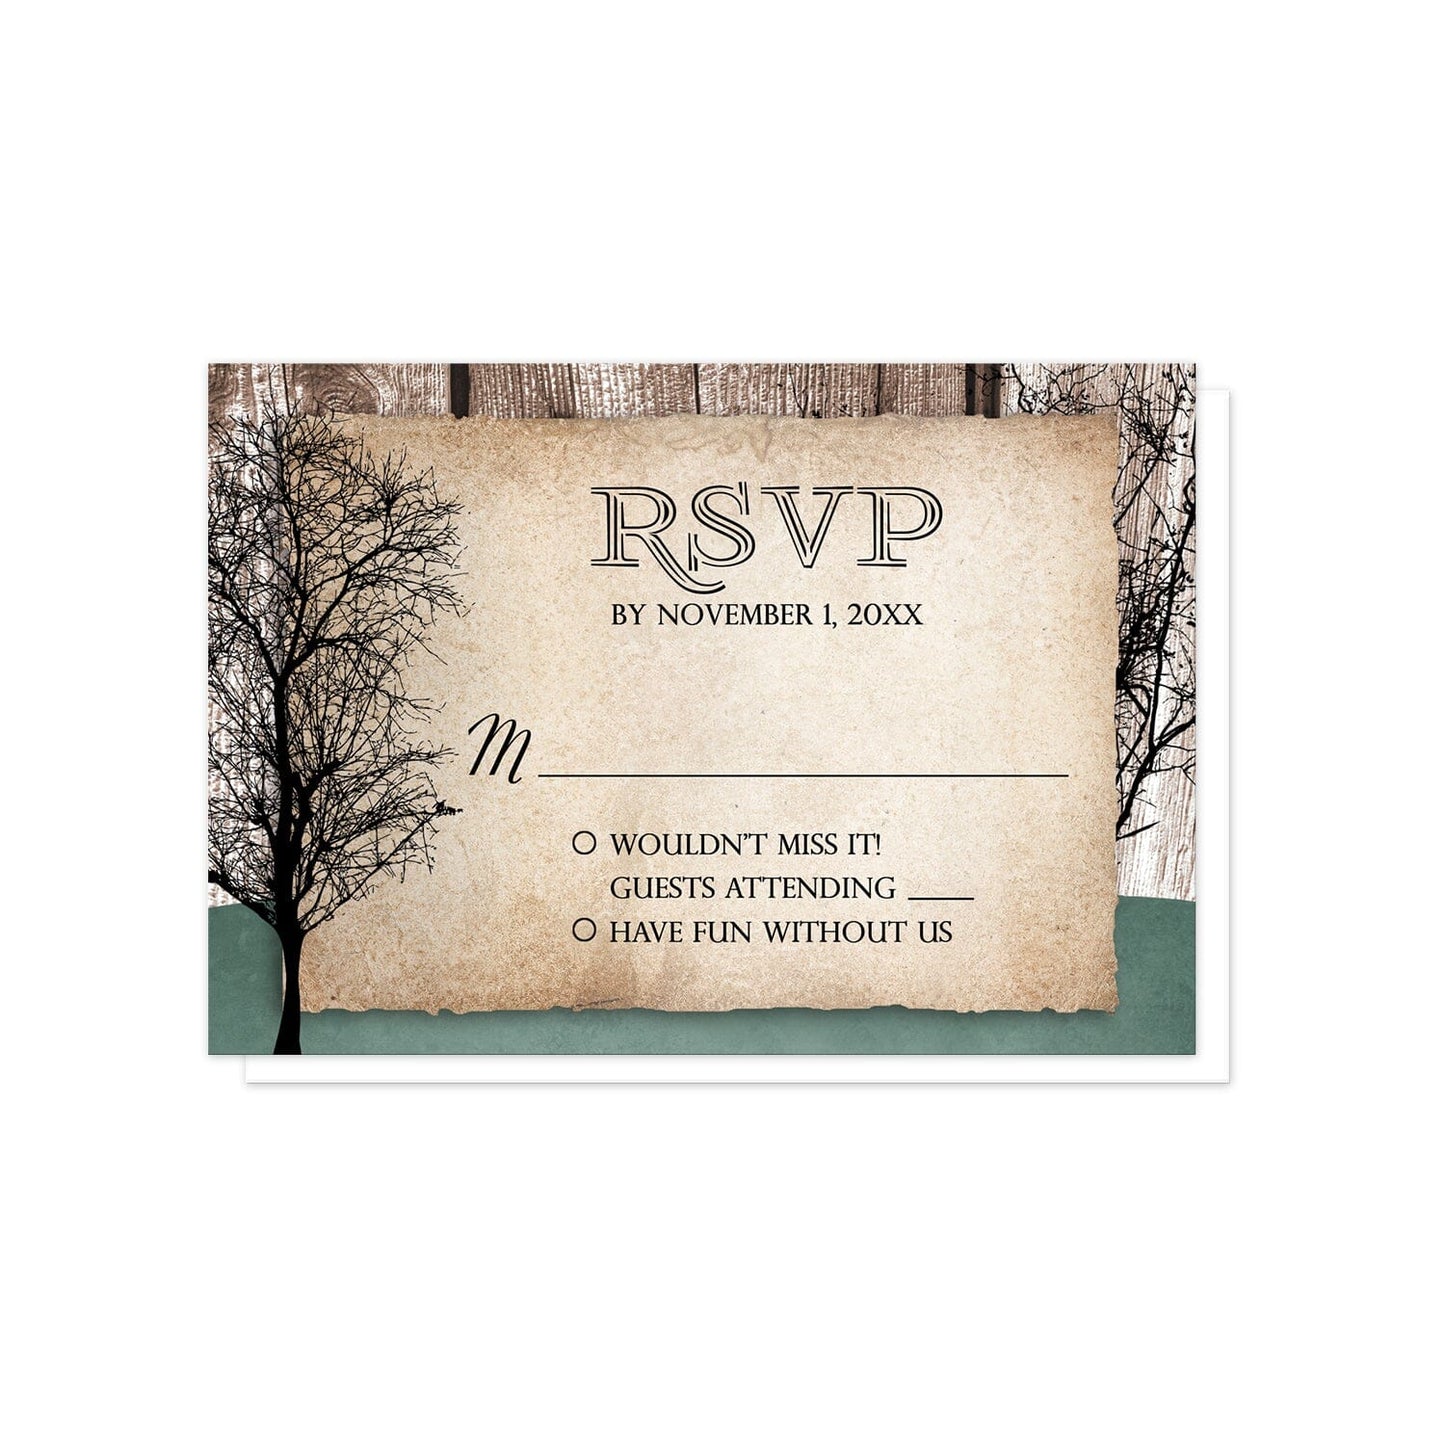 Rustic Woodsy Deer RSVP cards at Artistically Invited. Rustic woodsy deer vow renewal invitations designed with silhouettes of a buck deer with antlers, a doe, and winter trees over a wood brown background and a faded hunter green design along the bottom. Your personalized RSVP date details are custom printed in black over a tattered rustic paper illustration between the deer.